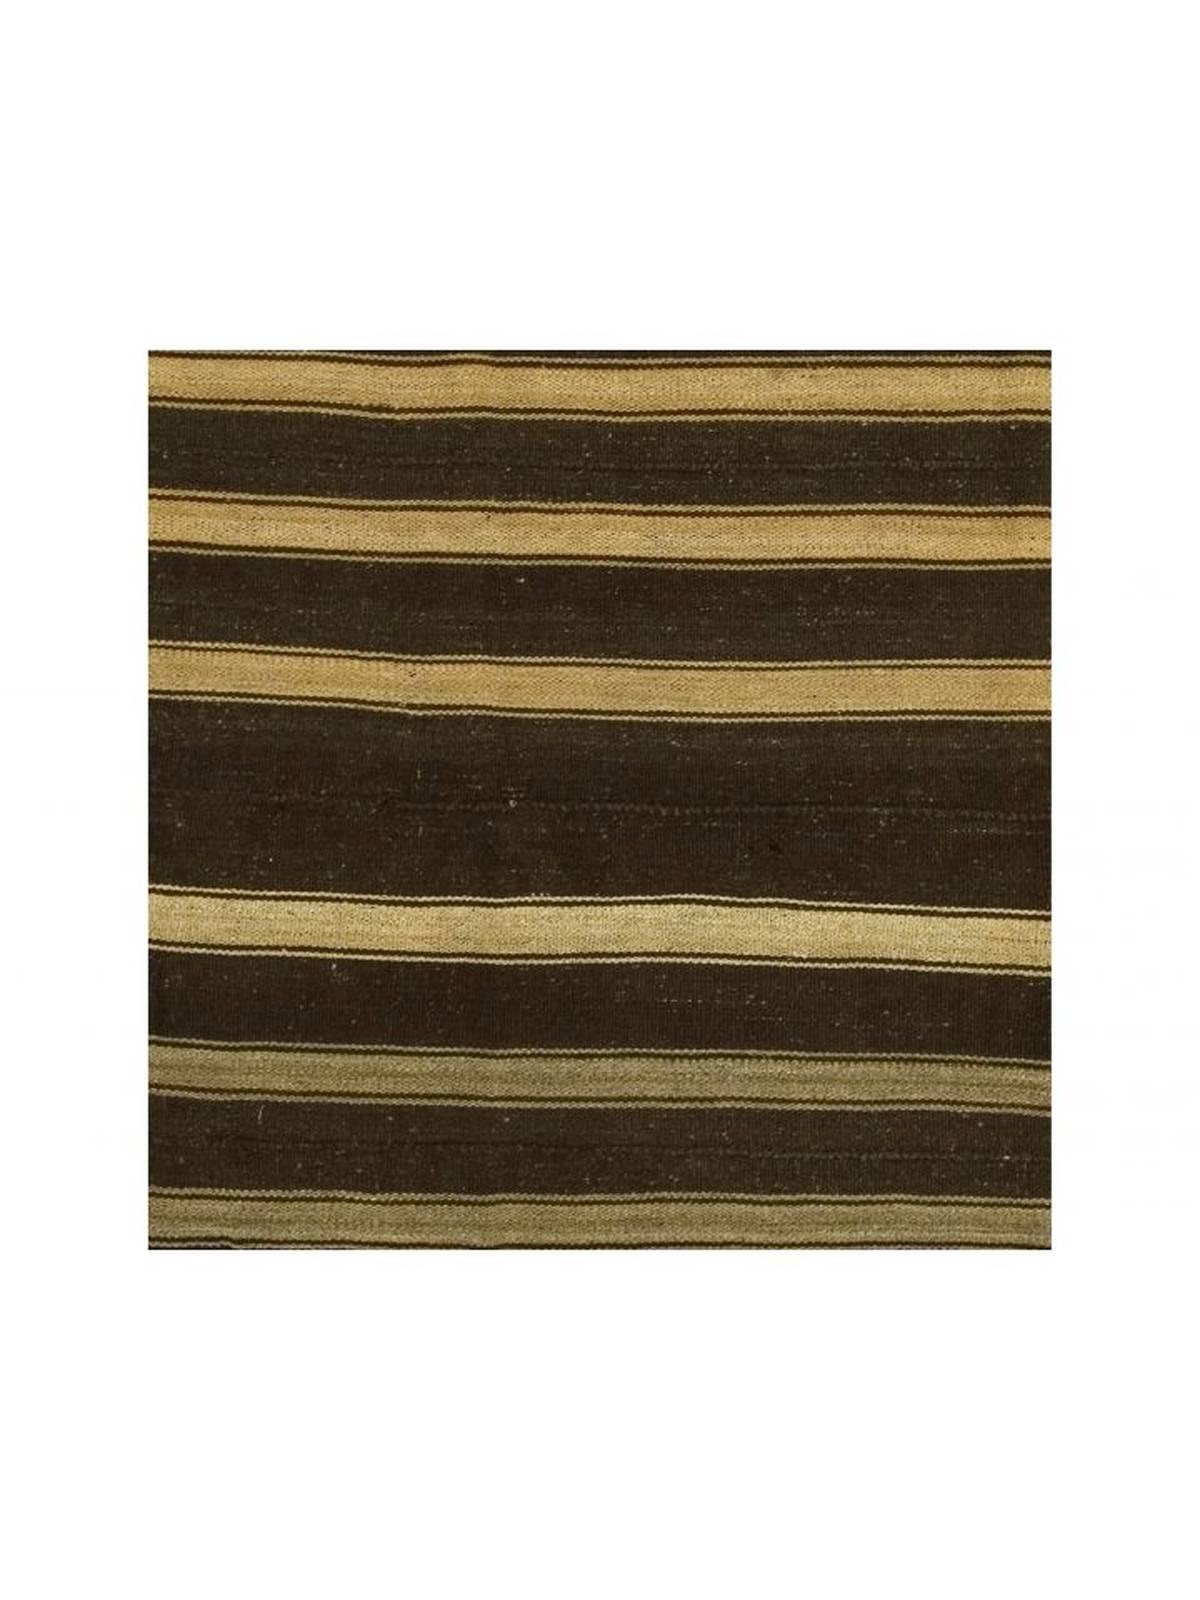 Hand-Woven Vintage Chocolate Brown Striped Turkish Kilim For Sale